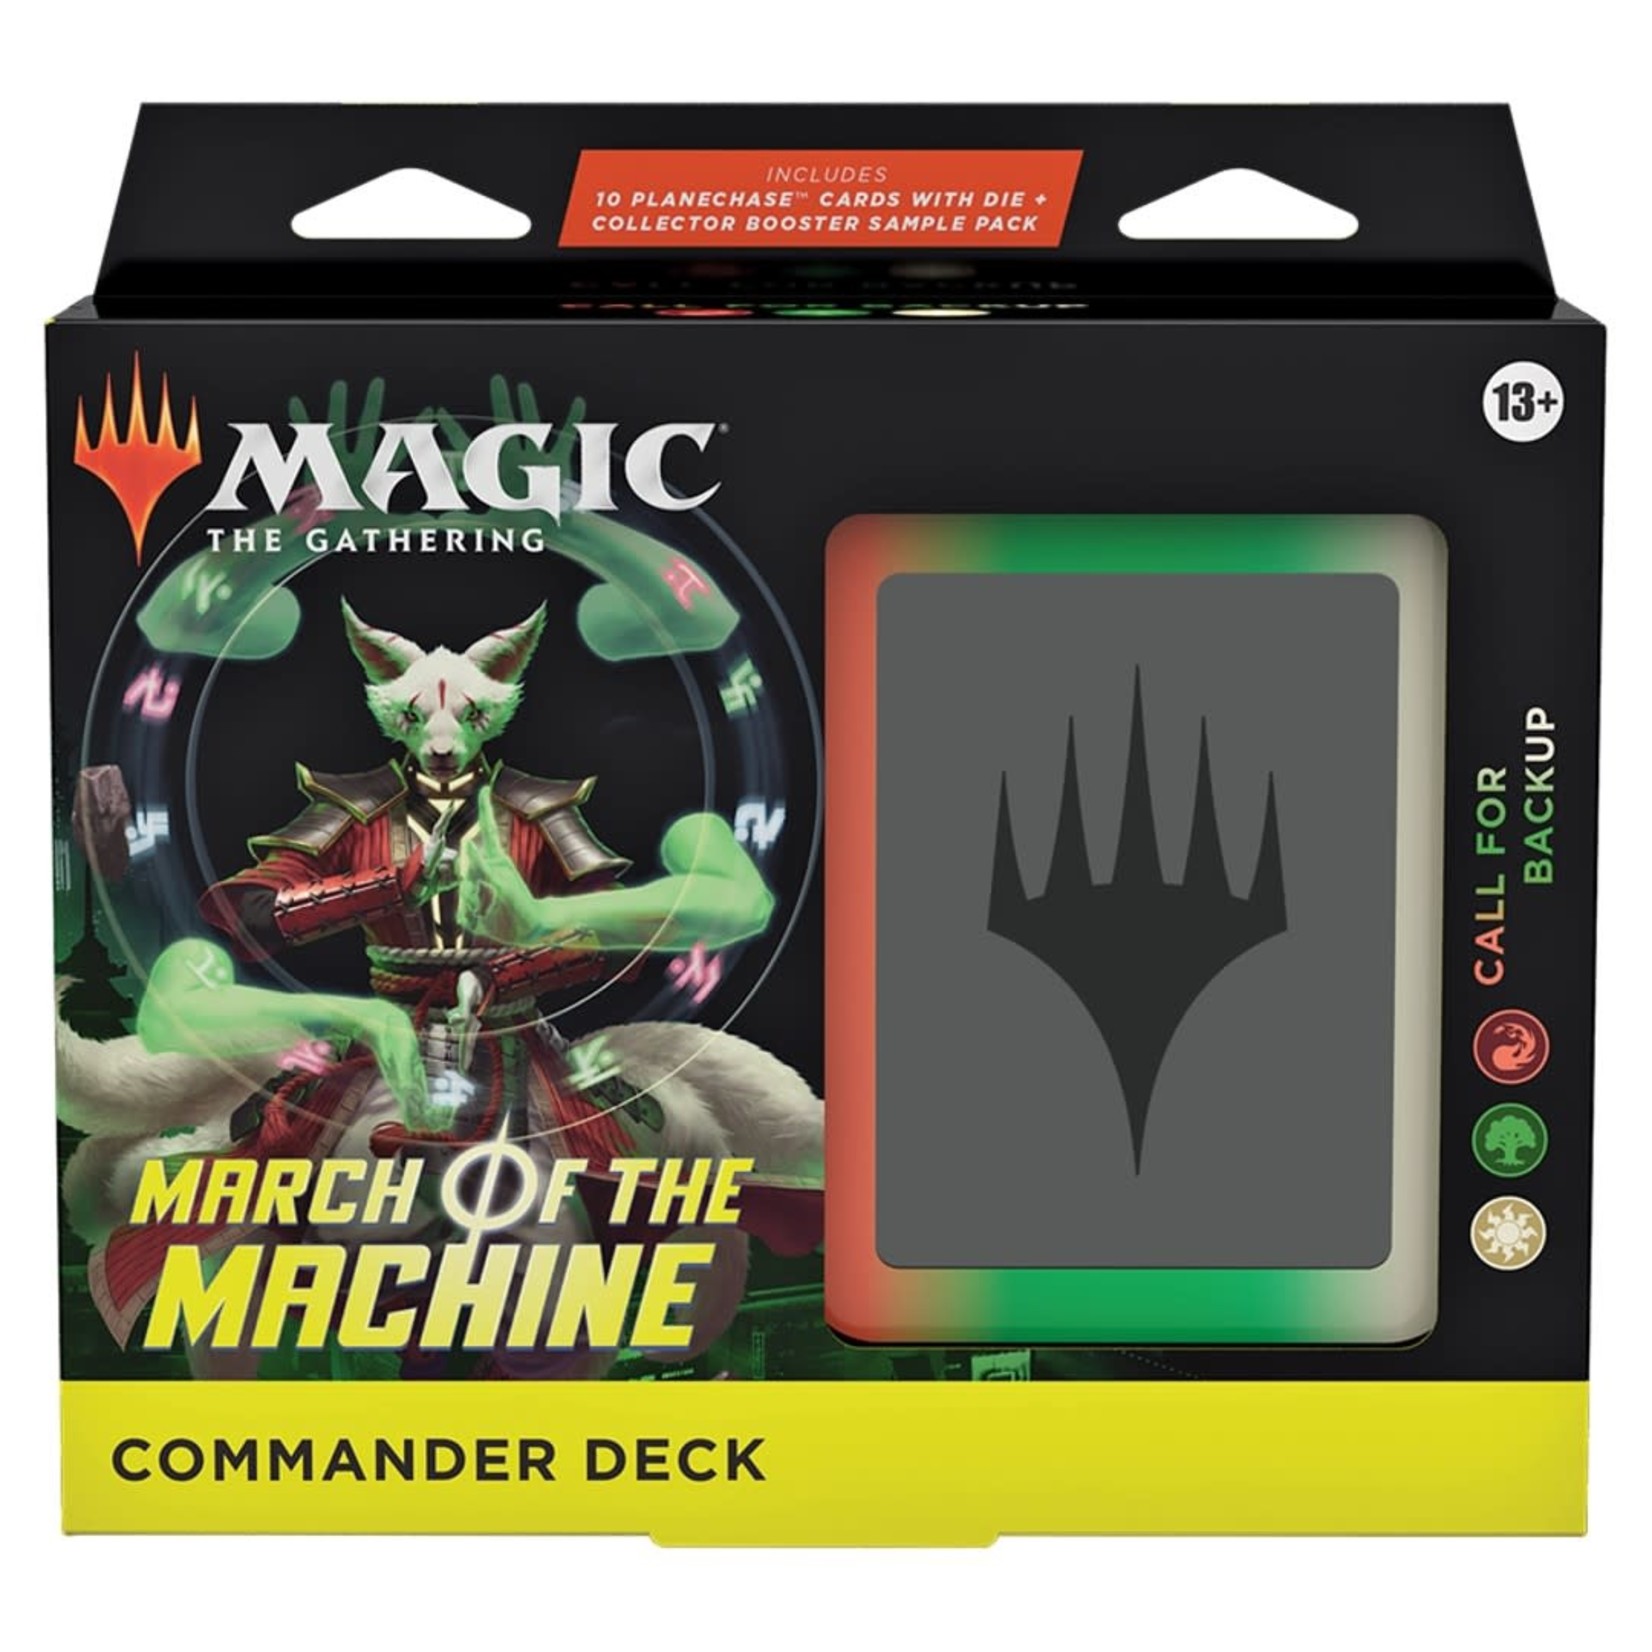 Wizards of the Coast Magic the Gathering Commander Deck Call for Backup March of the Machine